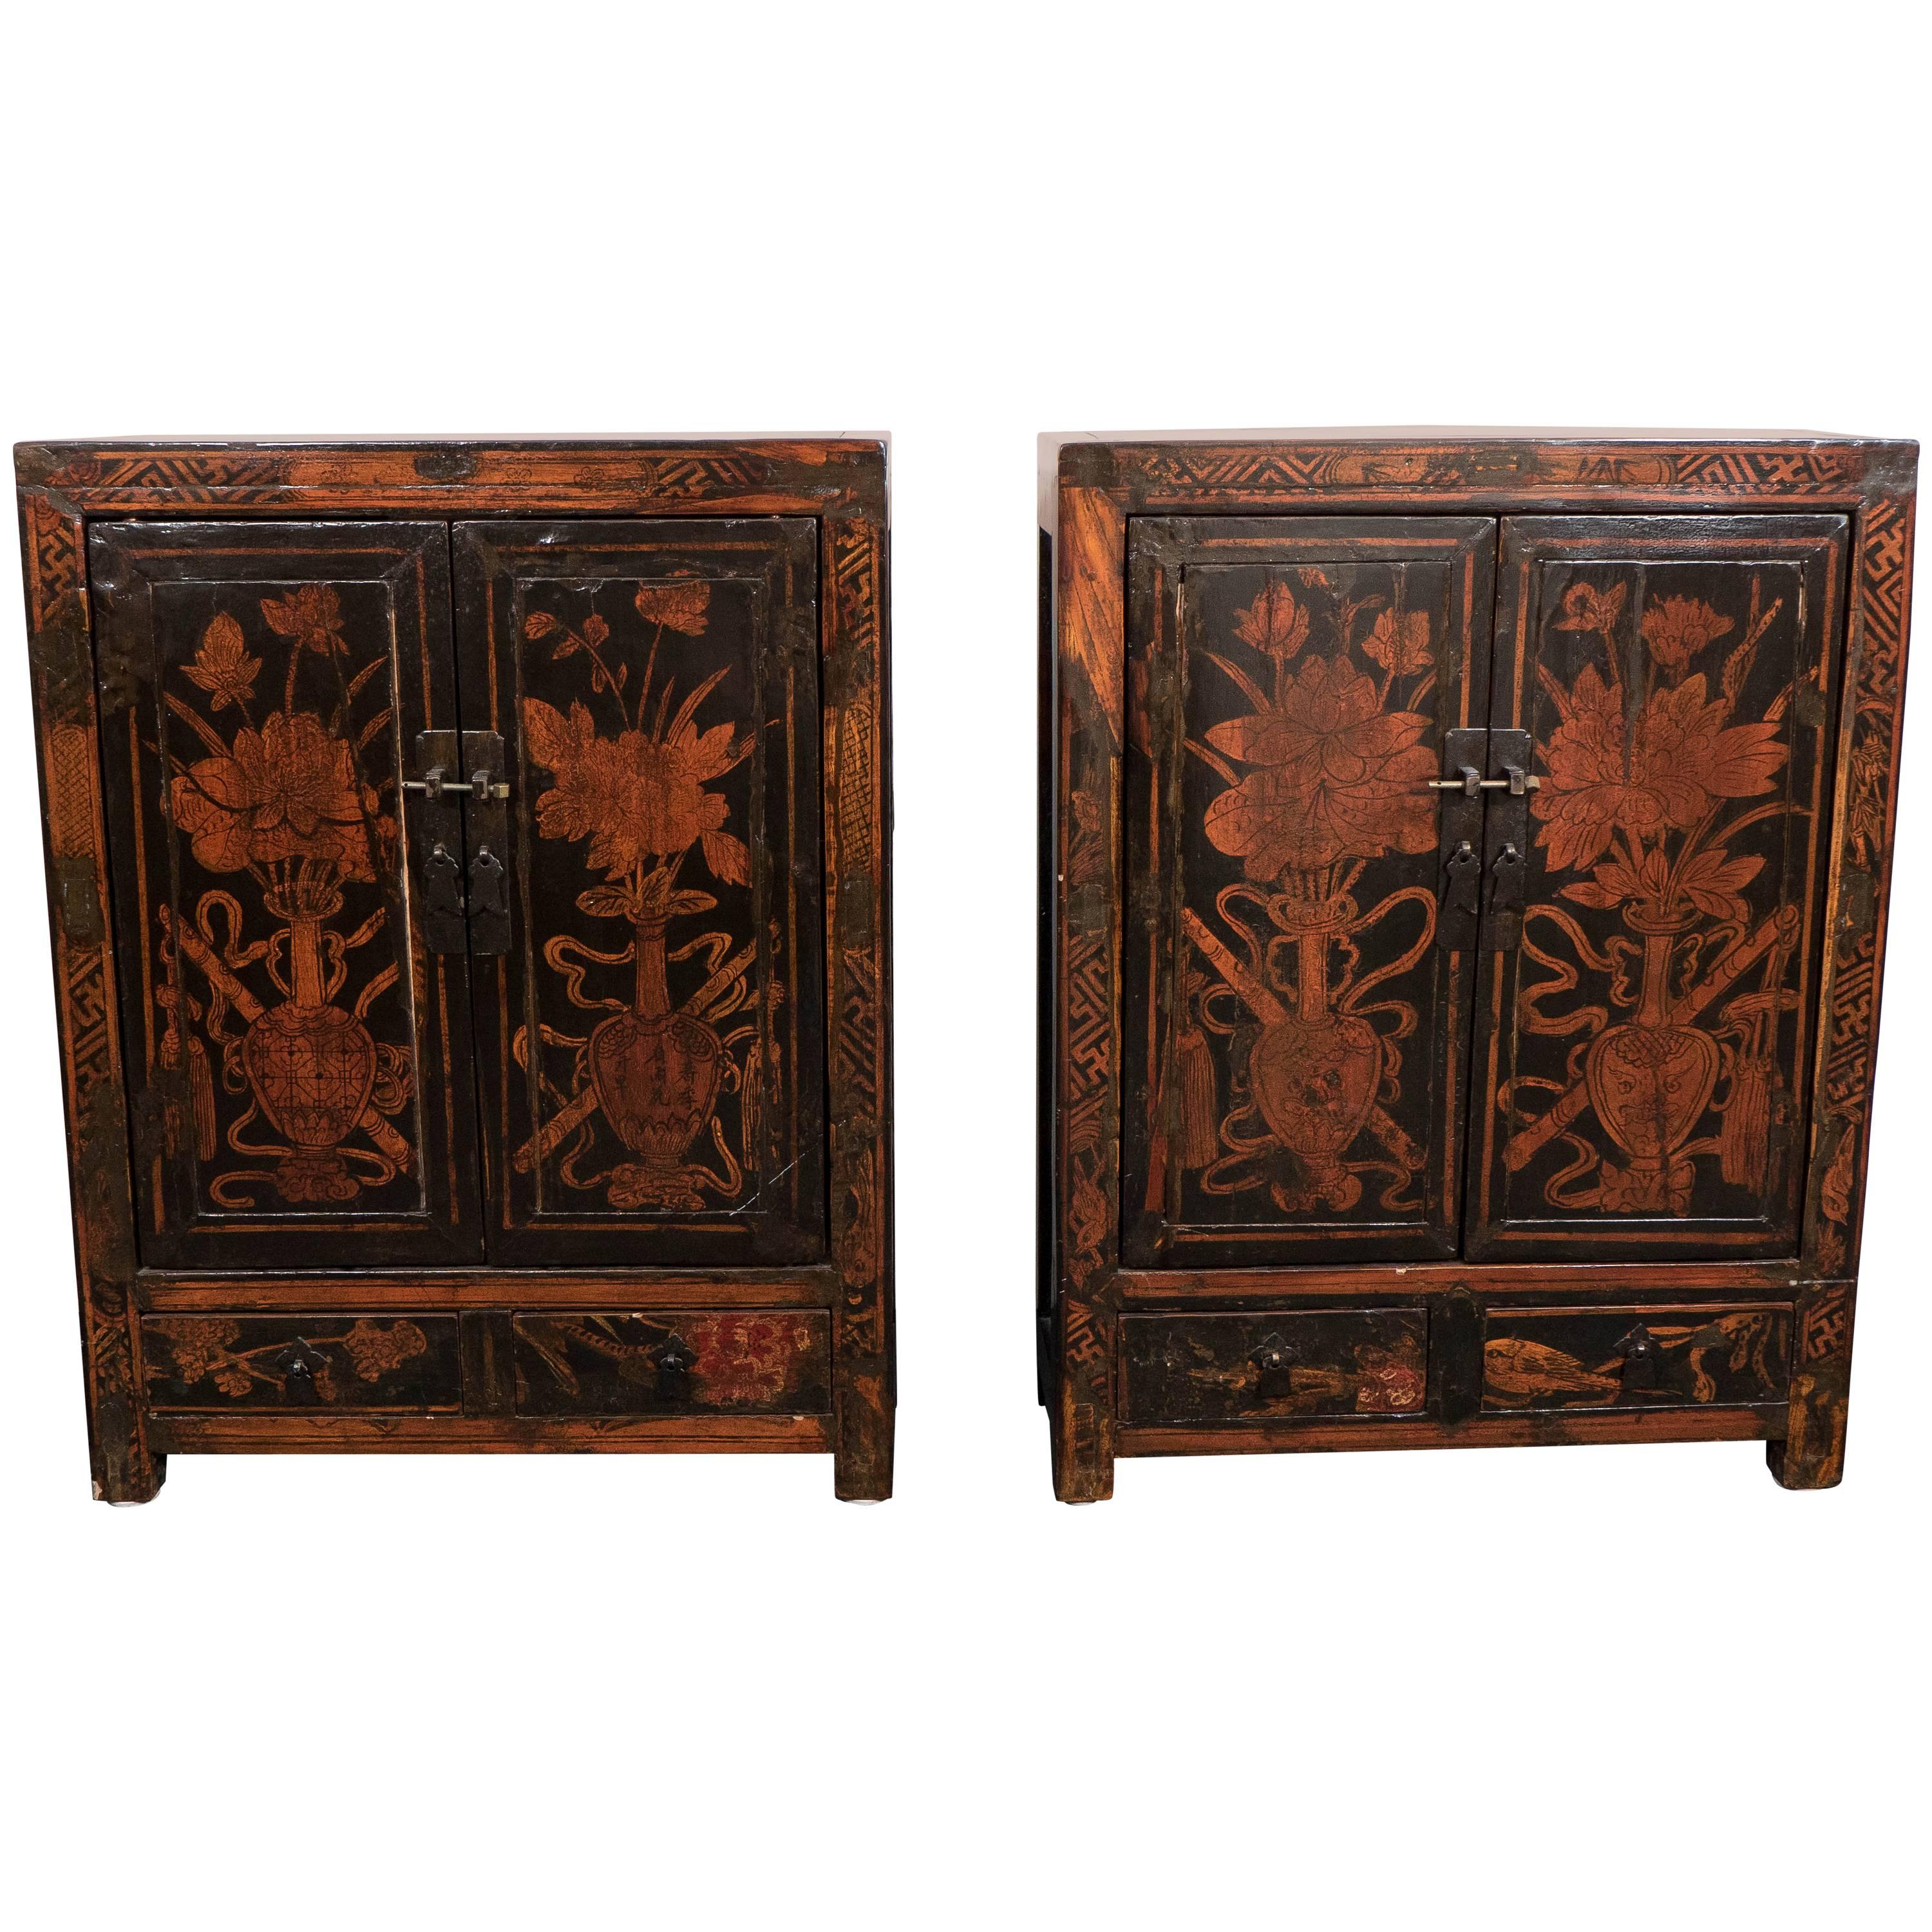 Pair of Chinese 18th Century Lacquer Cabinets